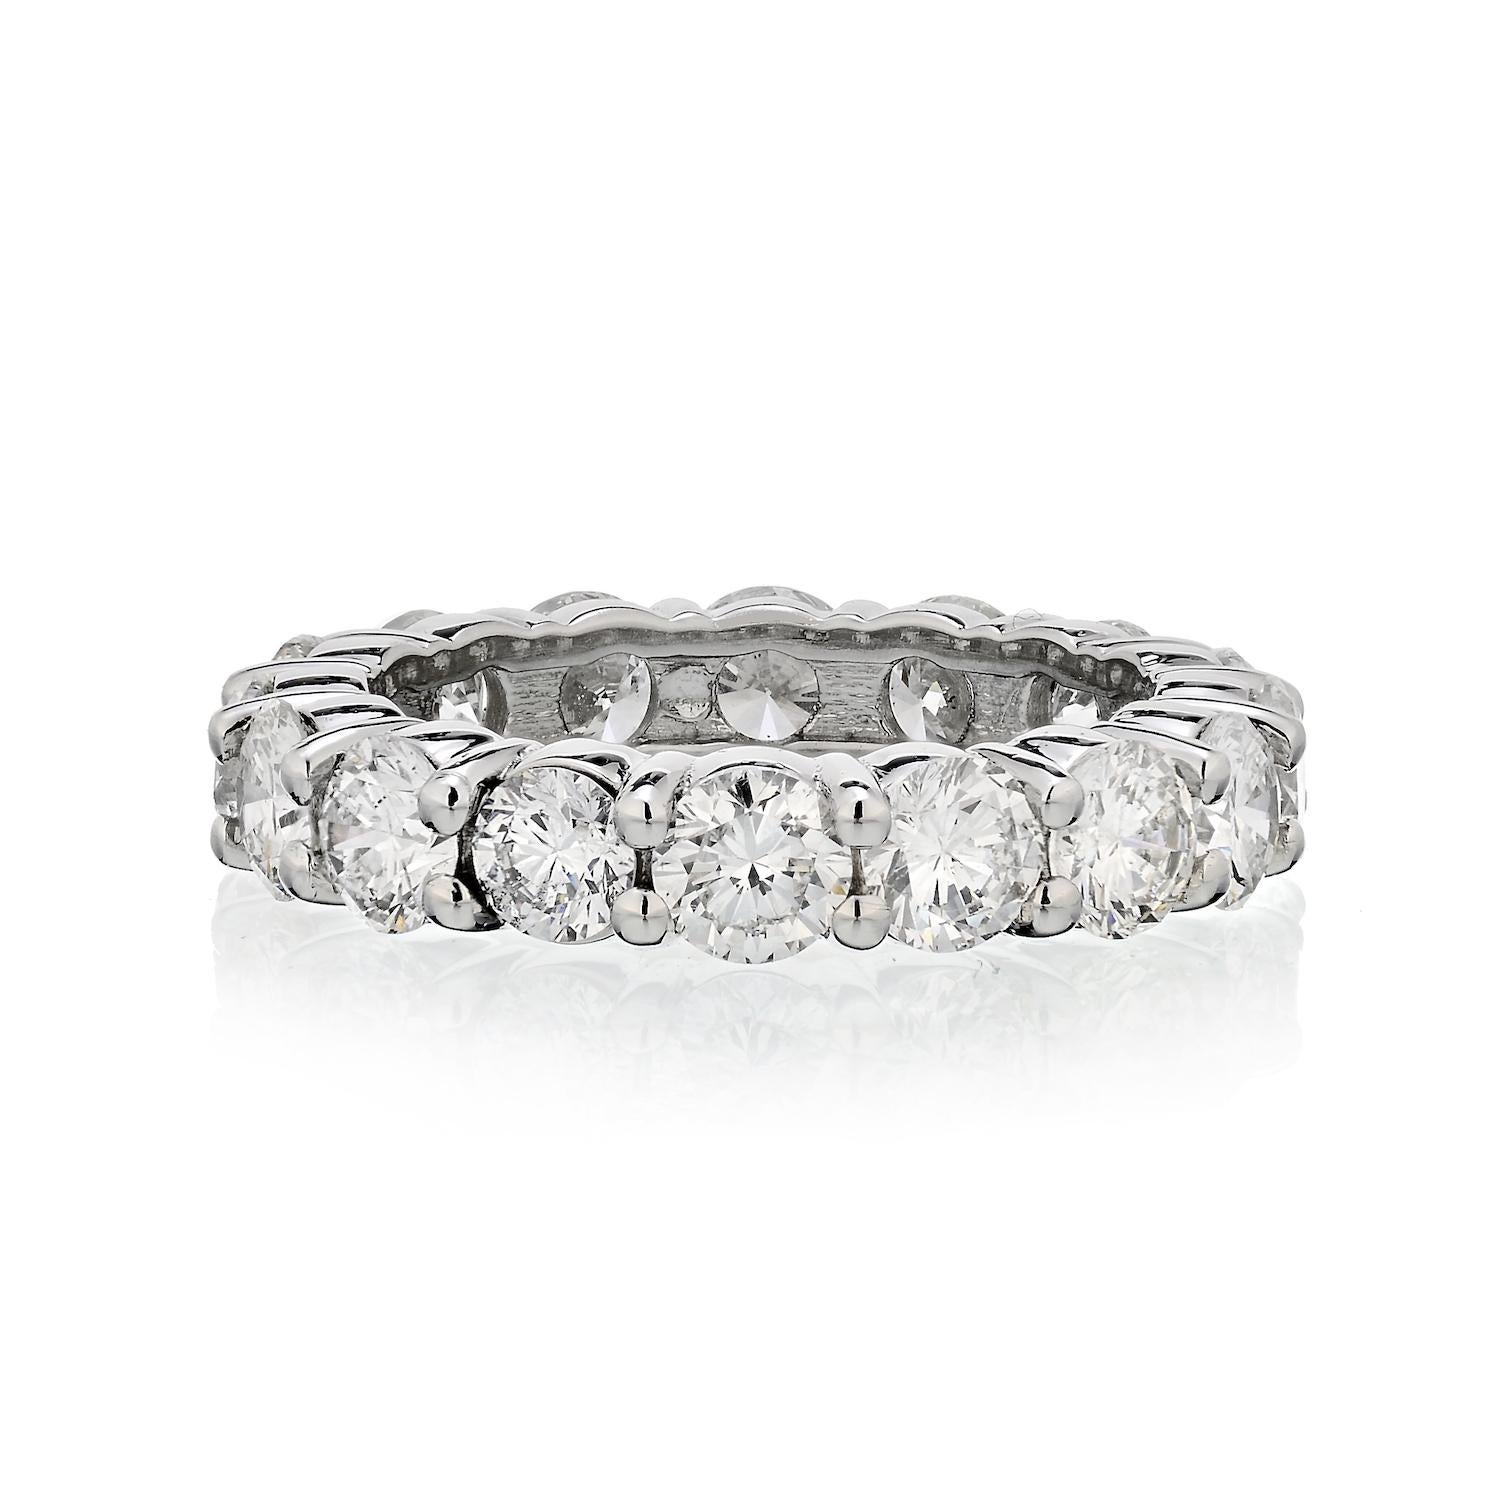 A stunning celebration of your commitment, this round-cut diamond eternity band is a confident choice for your bride or bride-to-be. Expertly crafted in sleek platinum, this sensational style showcases sparkling diamonds - each boasting a color rank